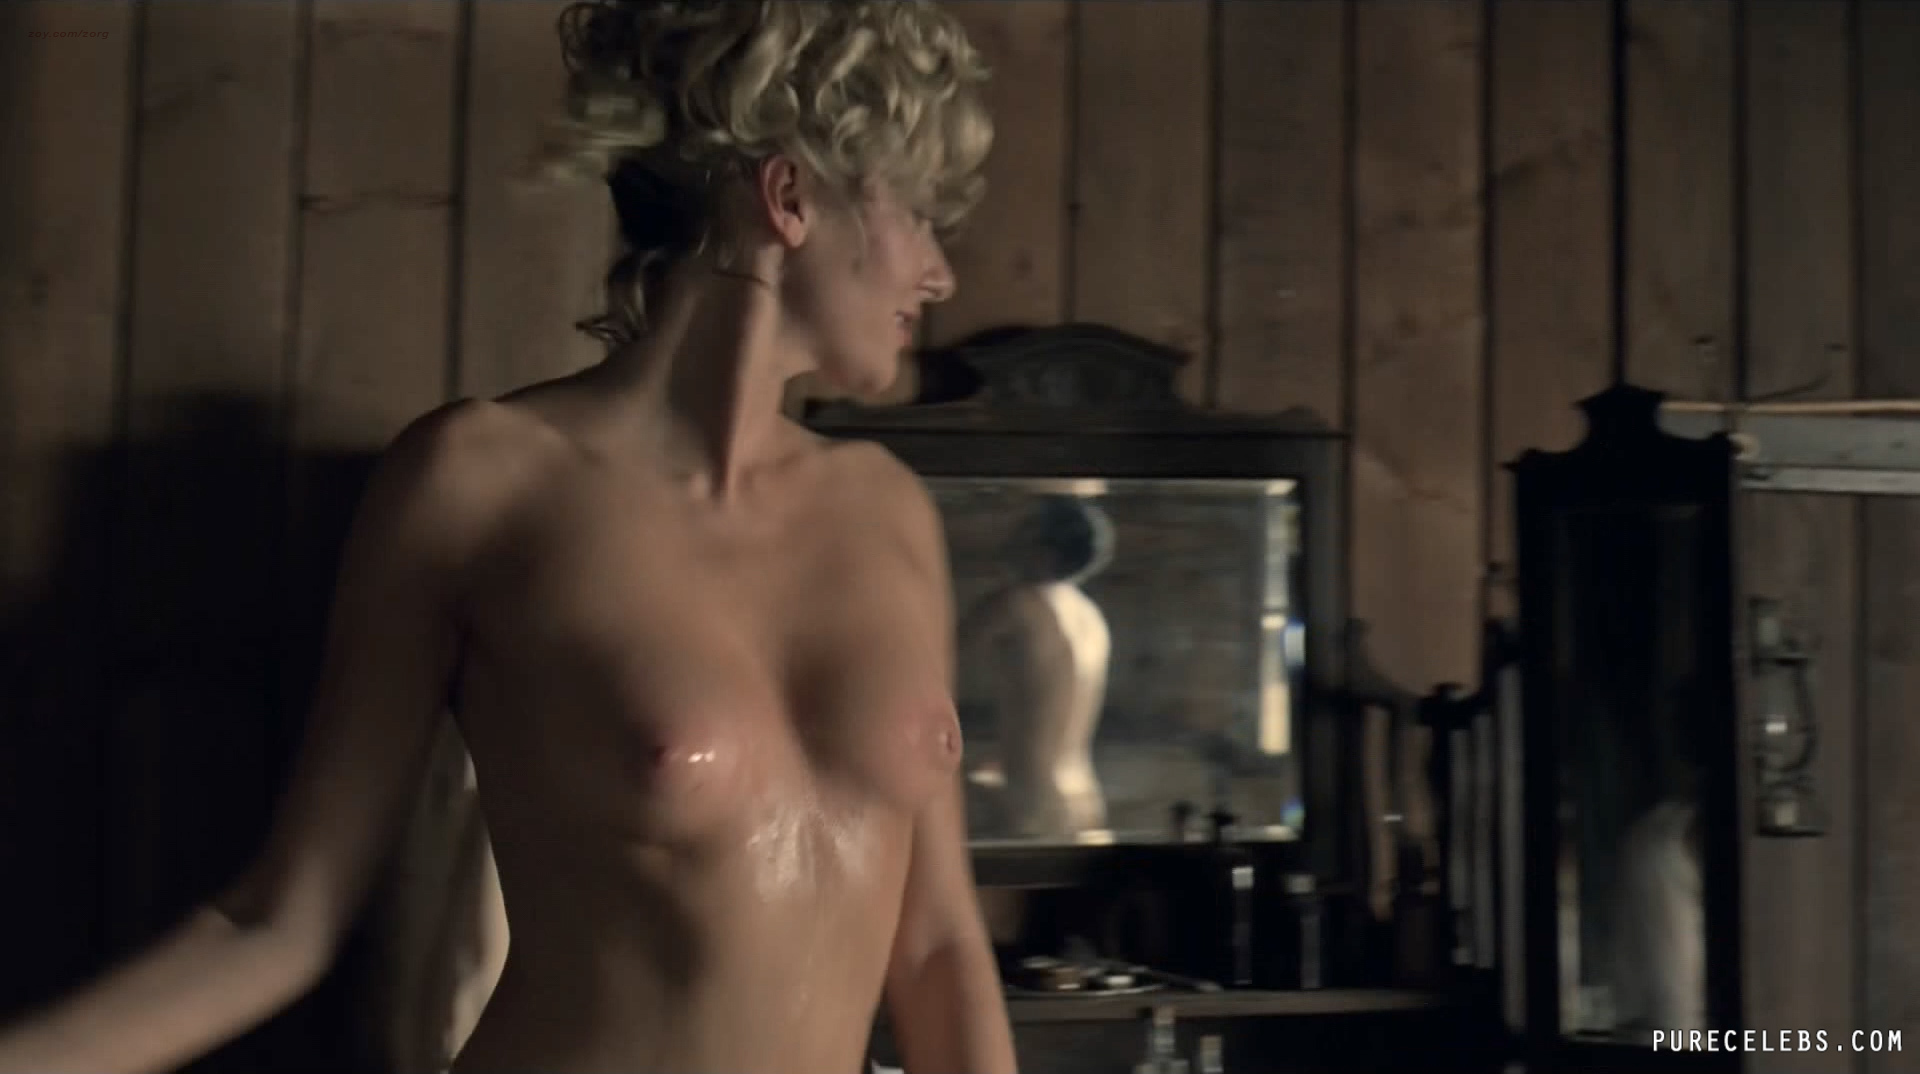 The latest hit TV series "Westworld" if full of naked babes and e...